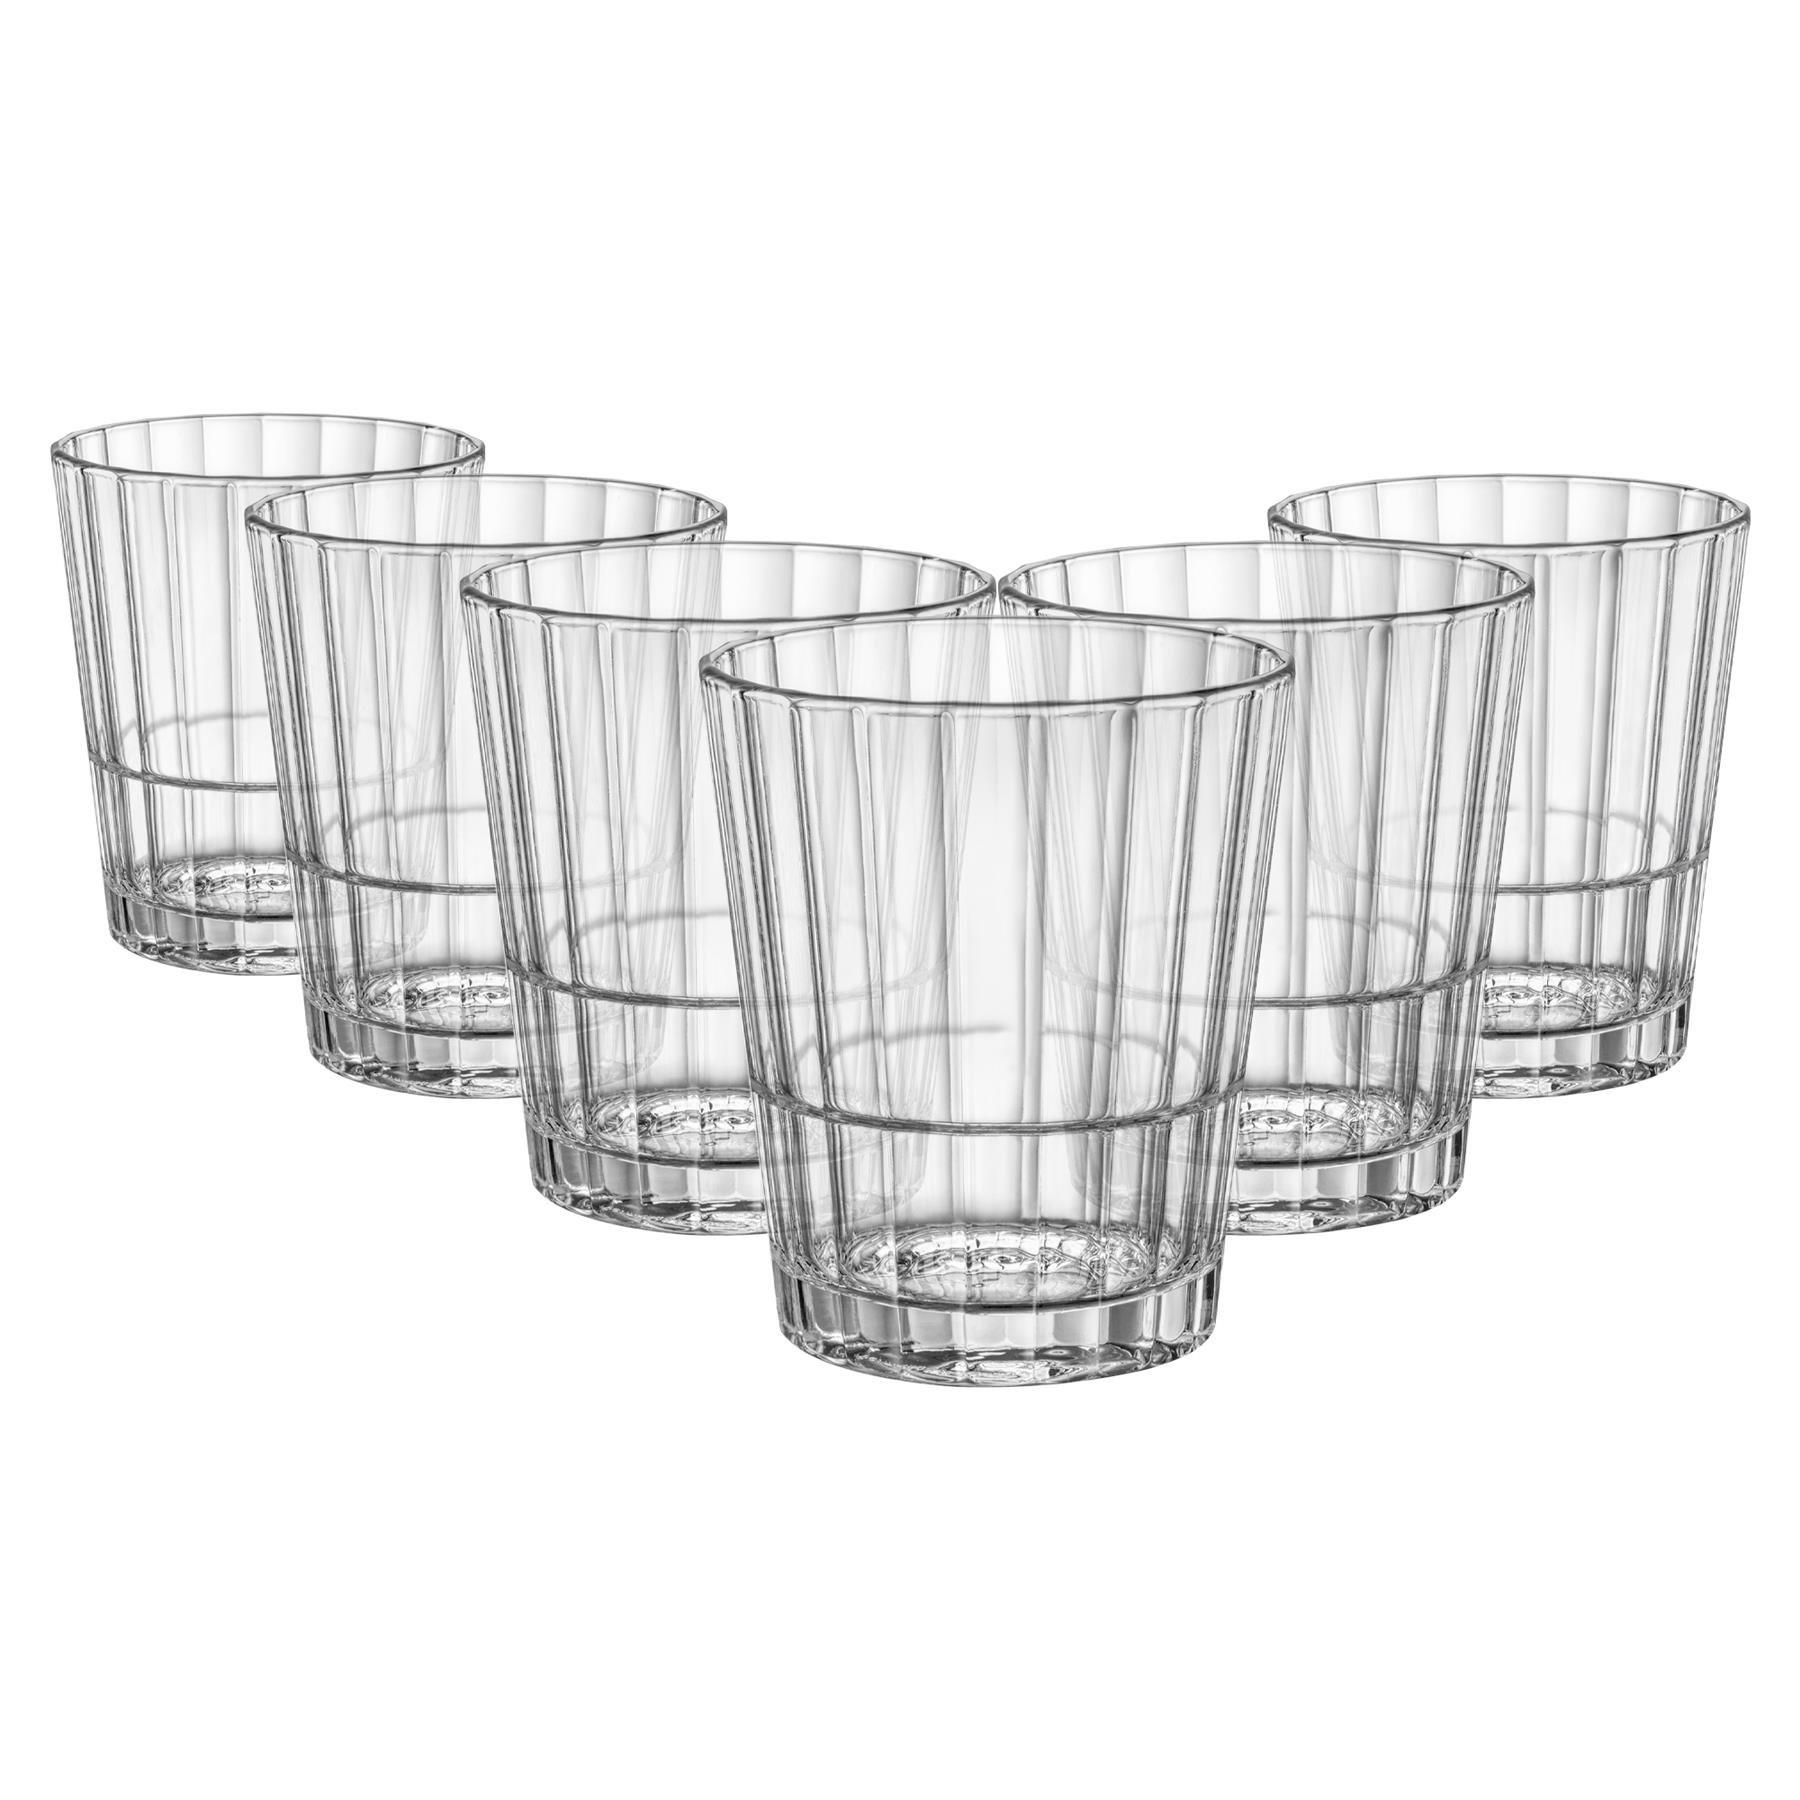 Photos - Glass Bormioli Rocco Oxford Bar Stacking Double Whisky Glasses - 374ml - Clear - Pack of 6 